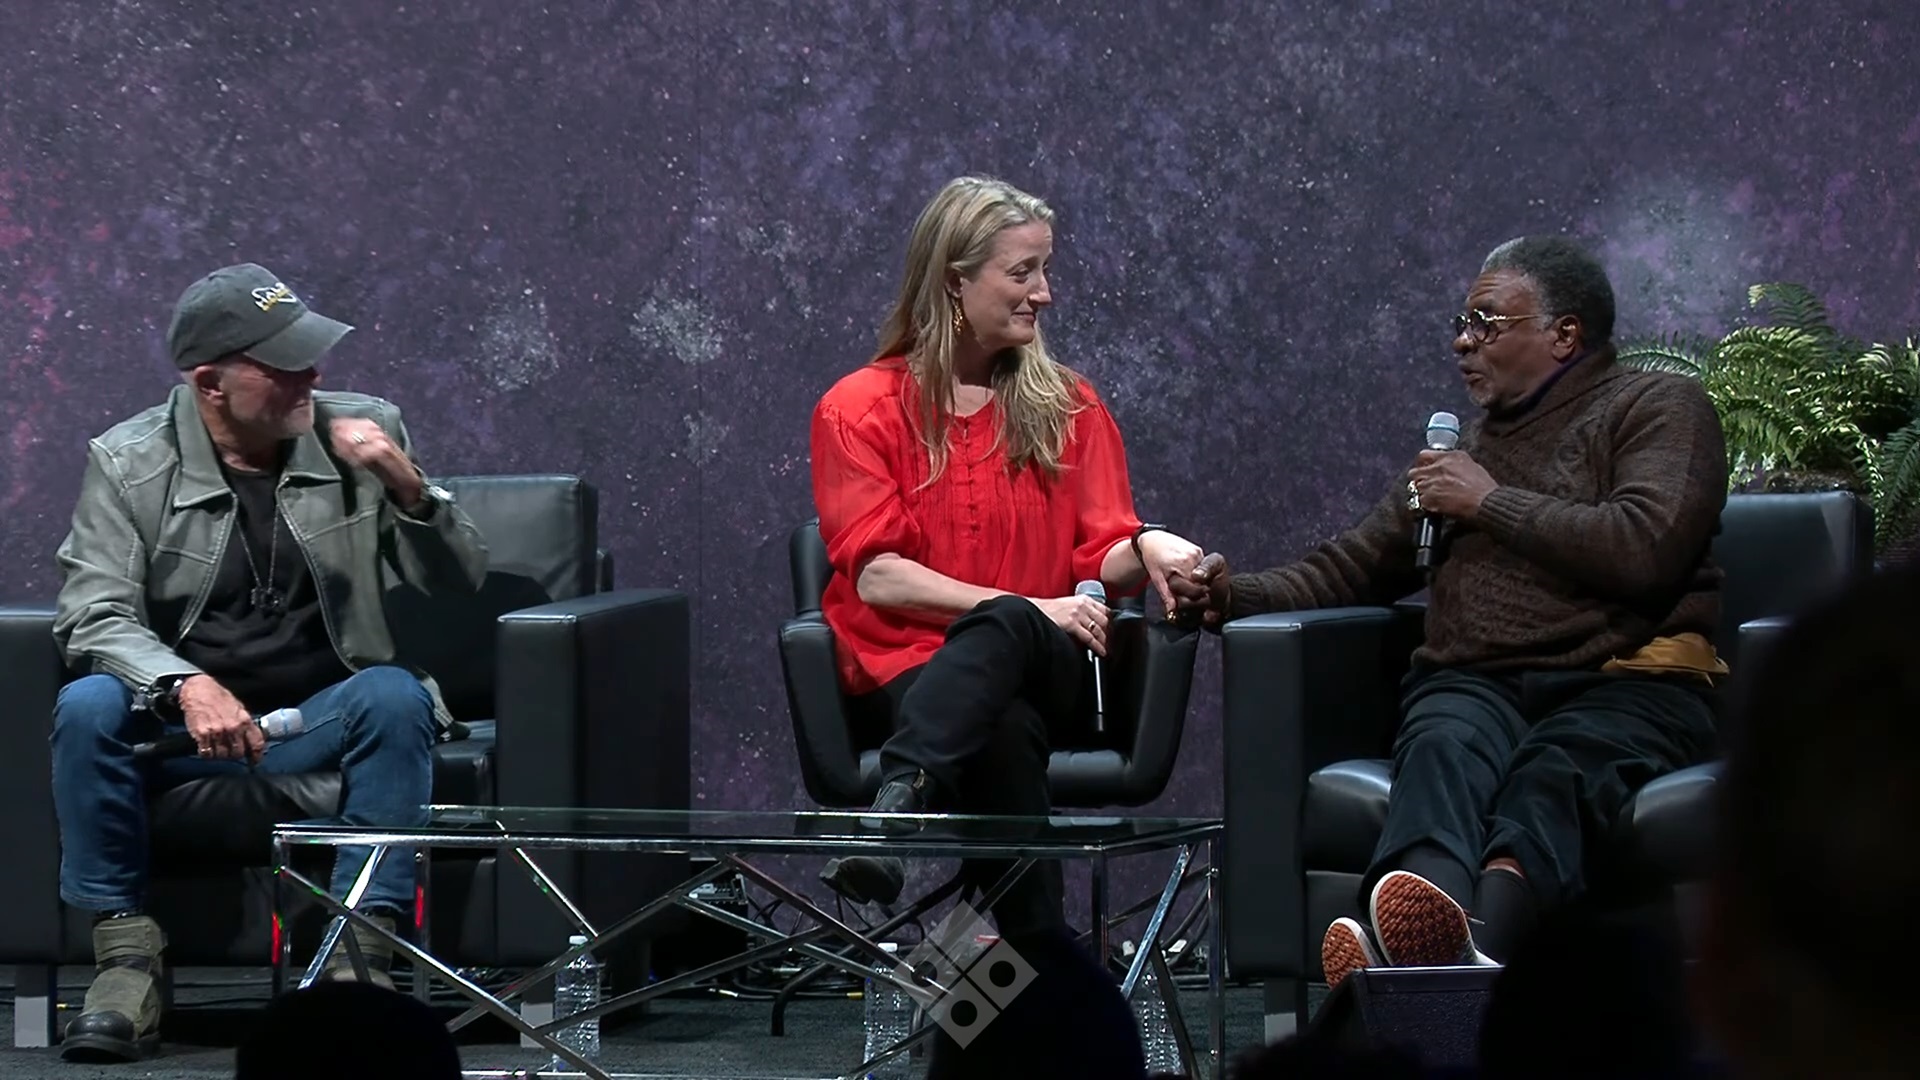 HaloWC 2023 image showing Steve Downes, Jen Taylor, and Keith David sat together on a panel